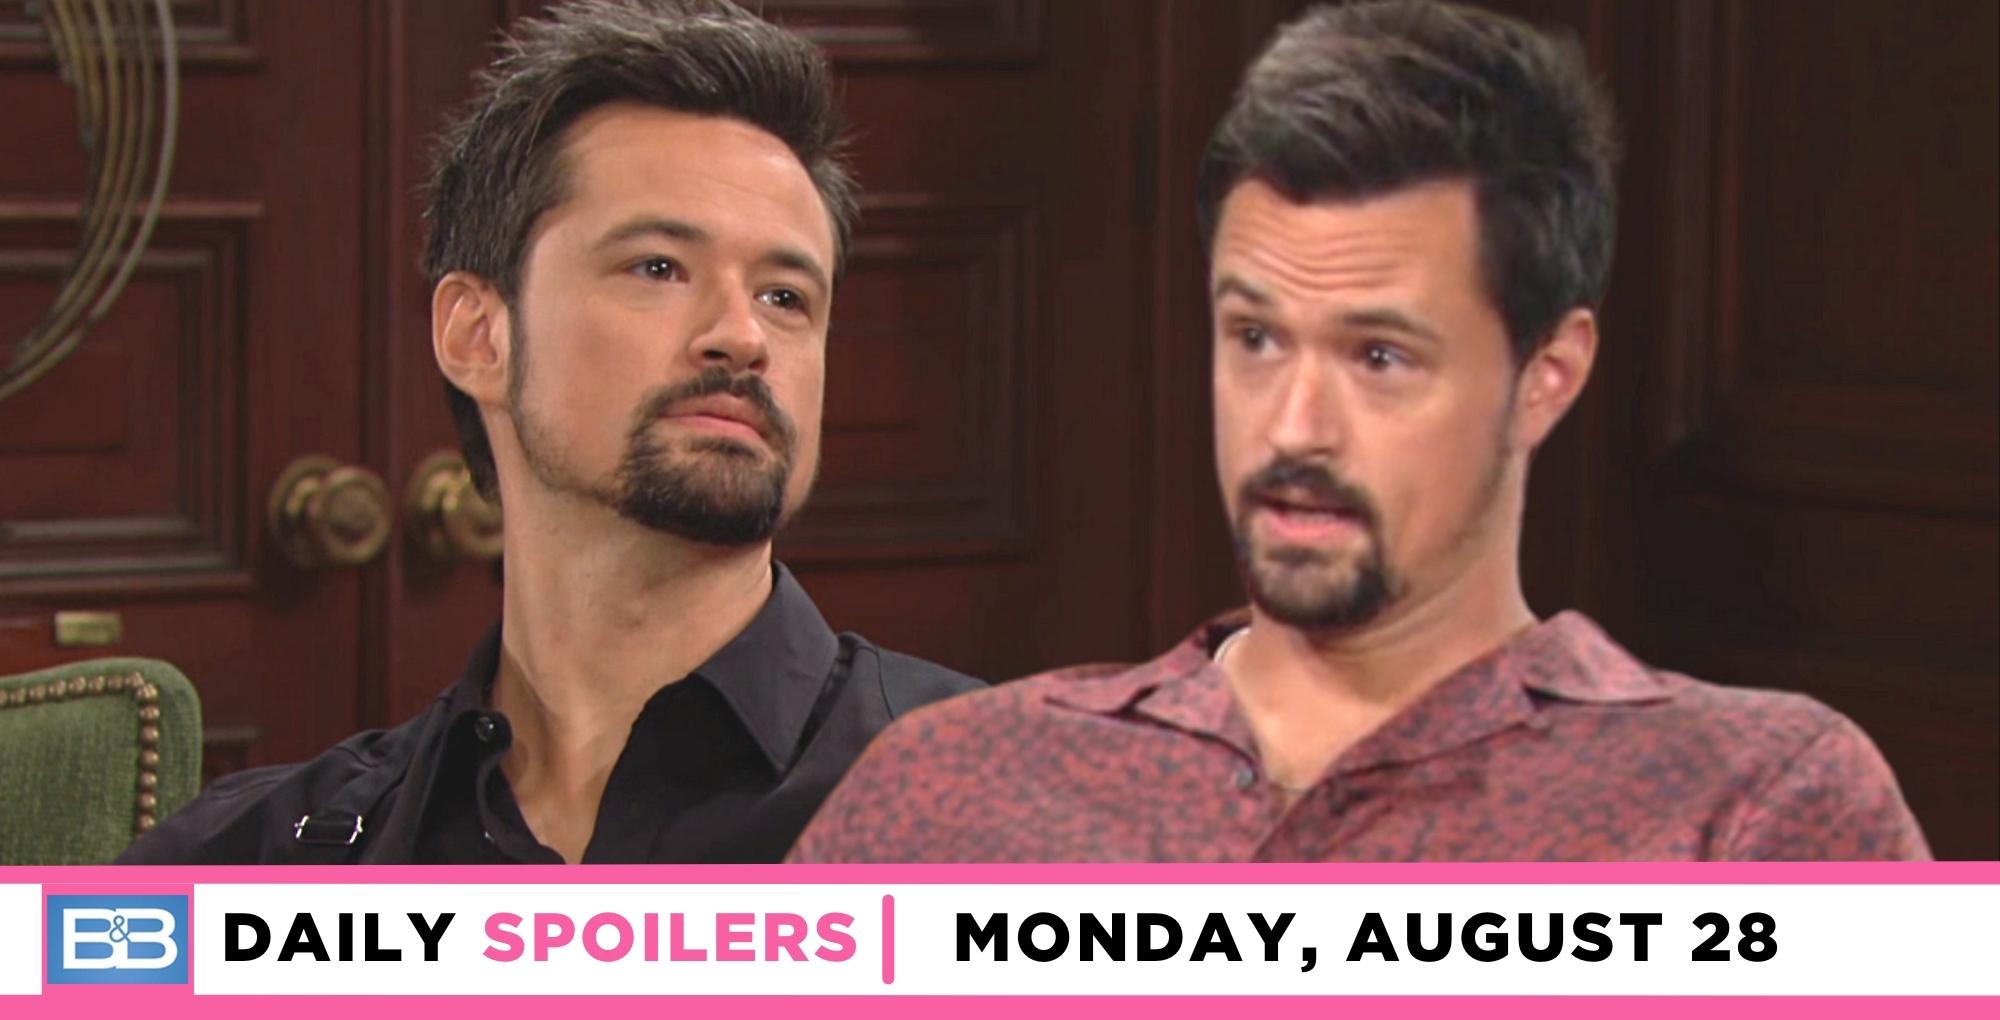 the bold and the beautiful spoilers for august 28, 2023 have two images of thomas forrester.